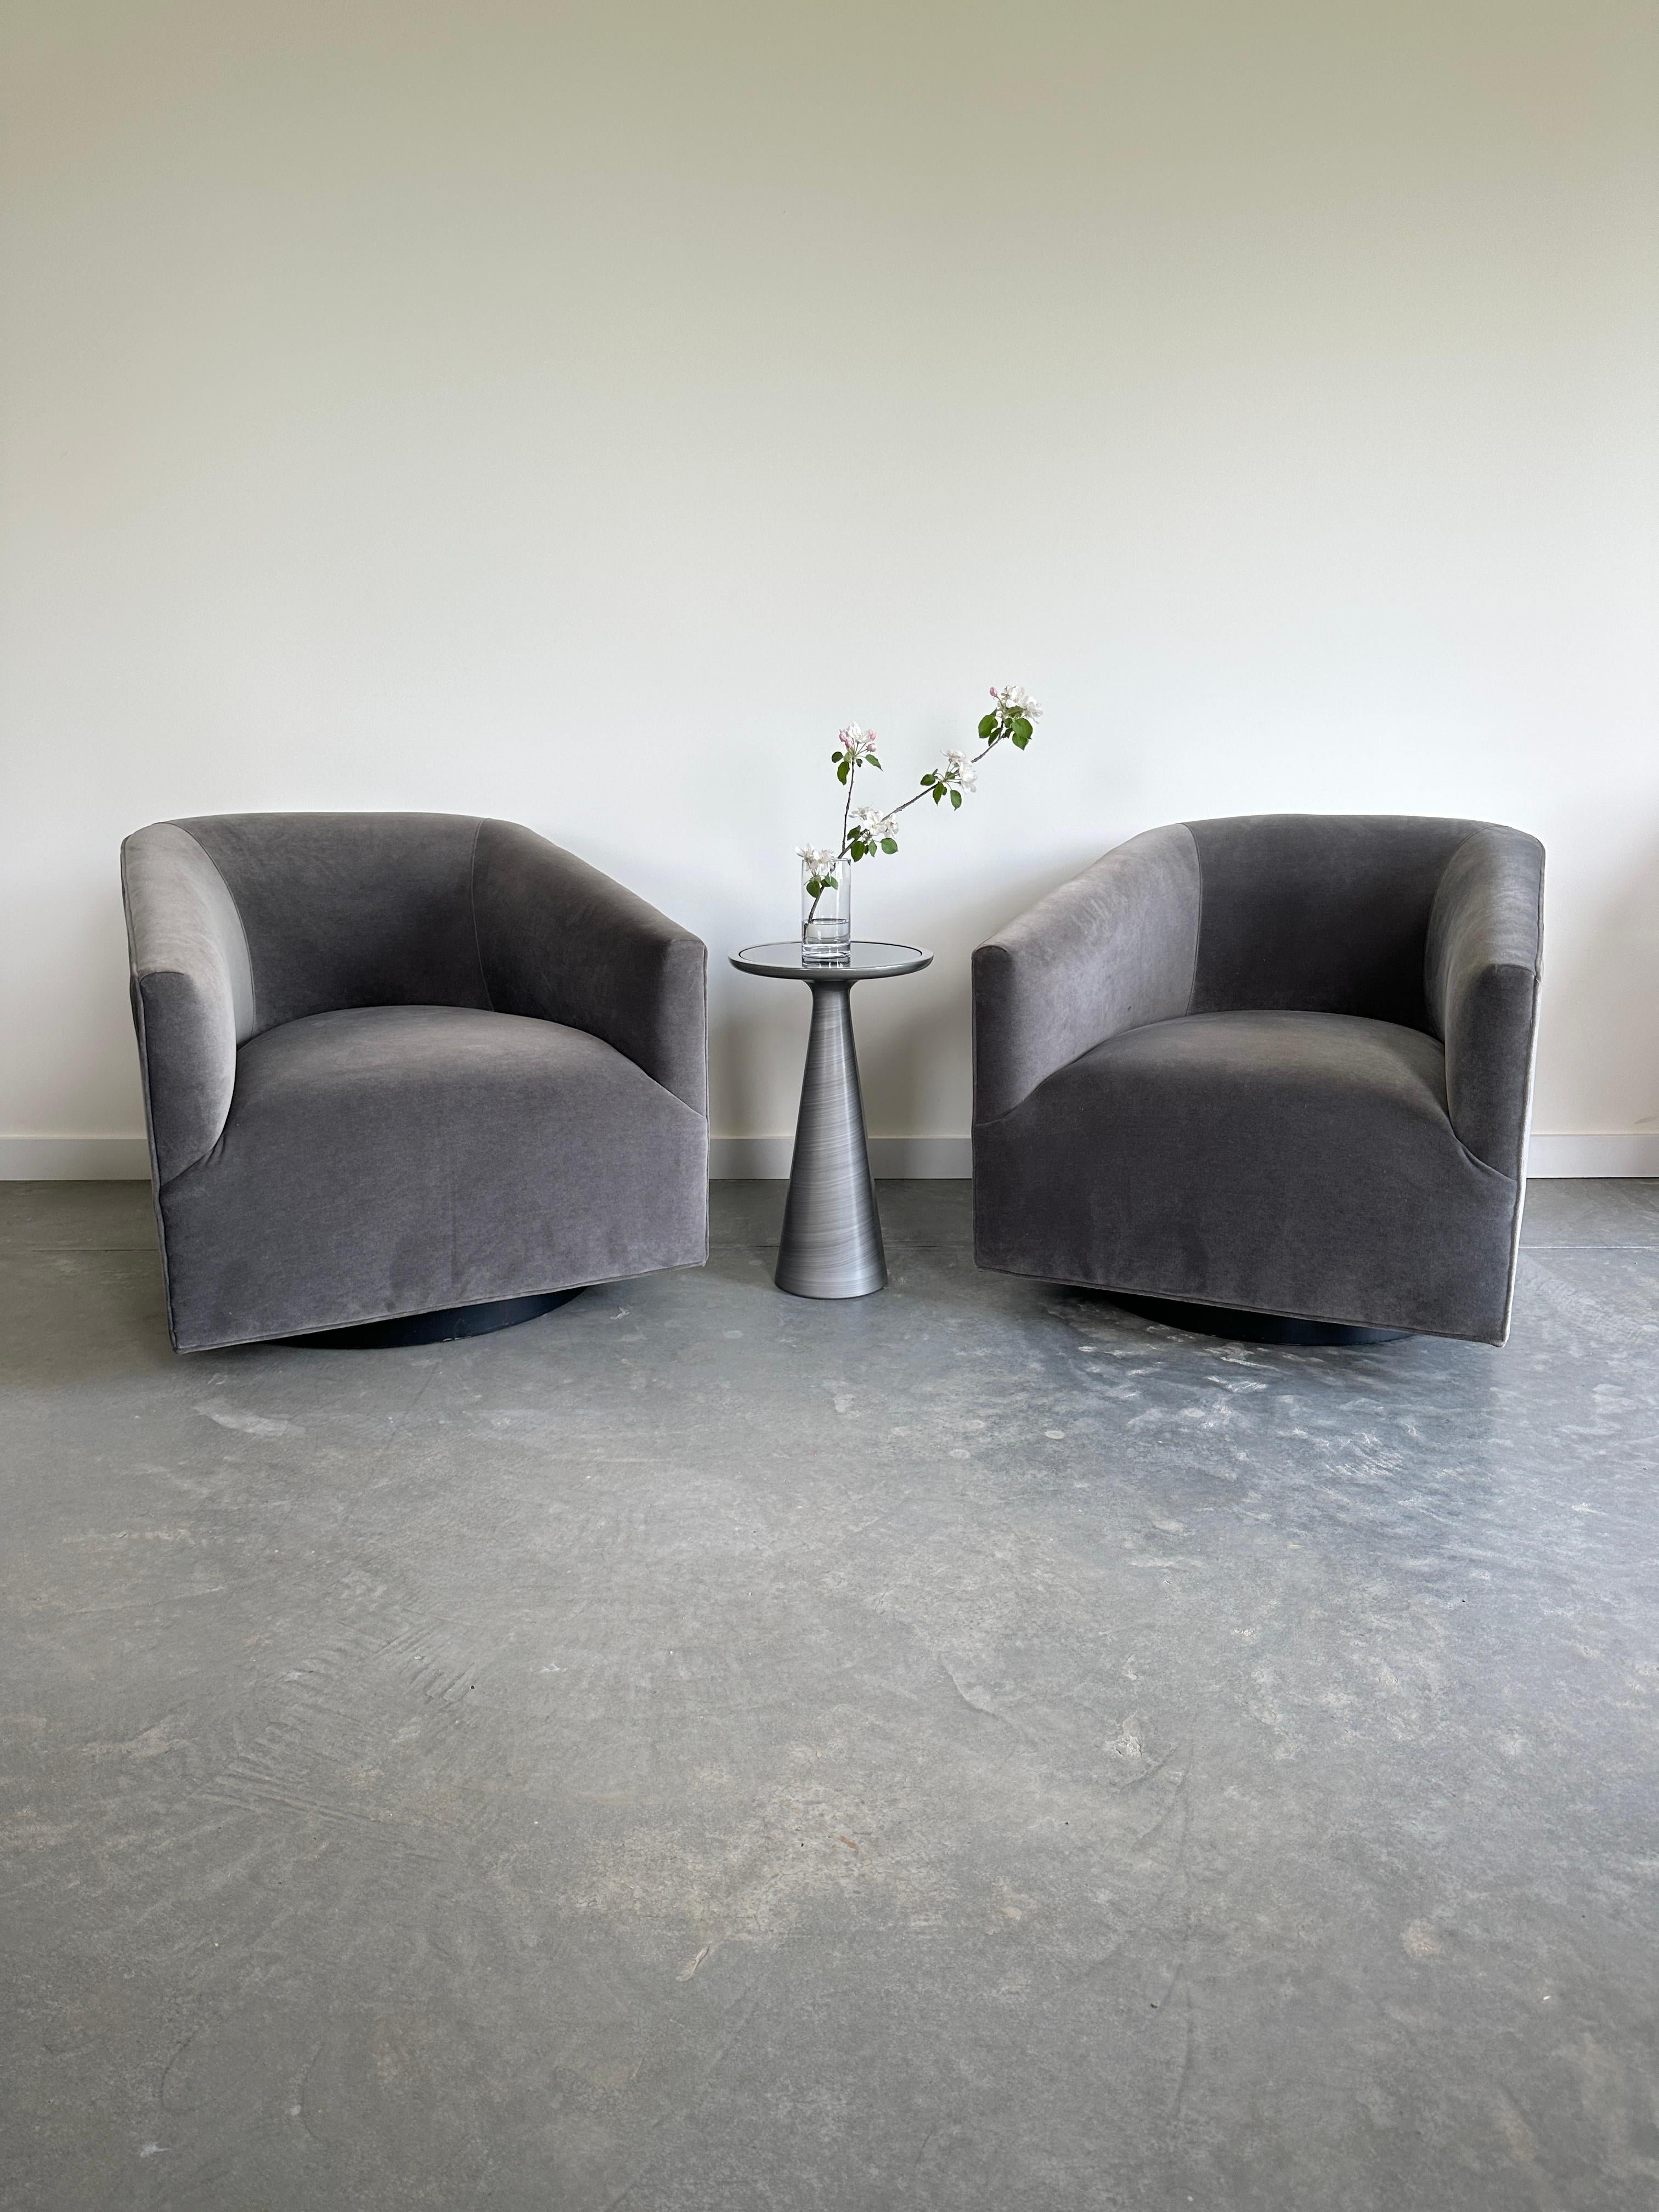 The Bianca Swivel Chair is a cozy and chic chair that can swivel and recline for your comfort. It features a barrel-back design with a clean silhouette on a round wood base. The chair is upholstered in a soft and luxurious grey velvet fabric with a